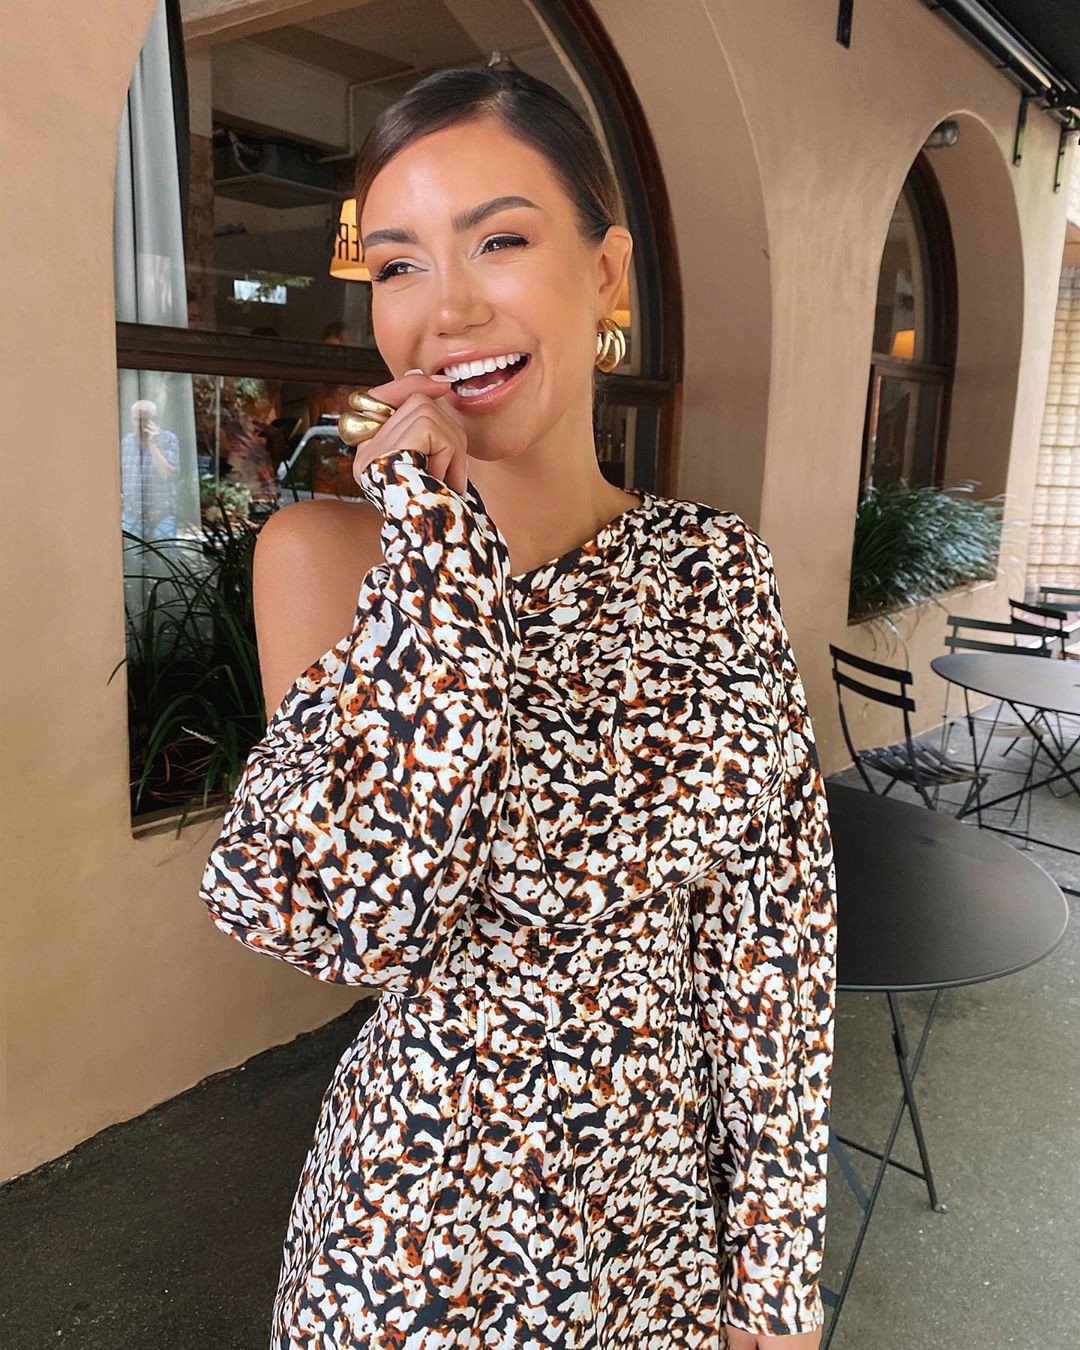 Pia Muehlenbeck dress blouse, top outfits for girls: Top,  Blouse,  Instagram girls  